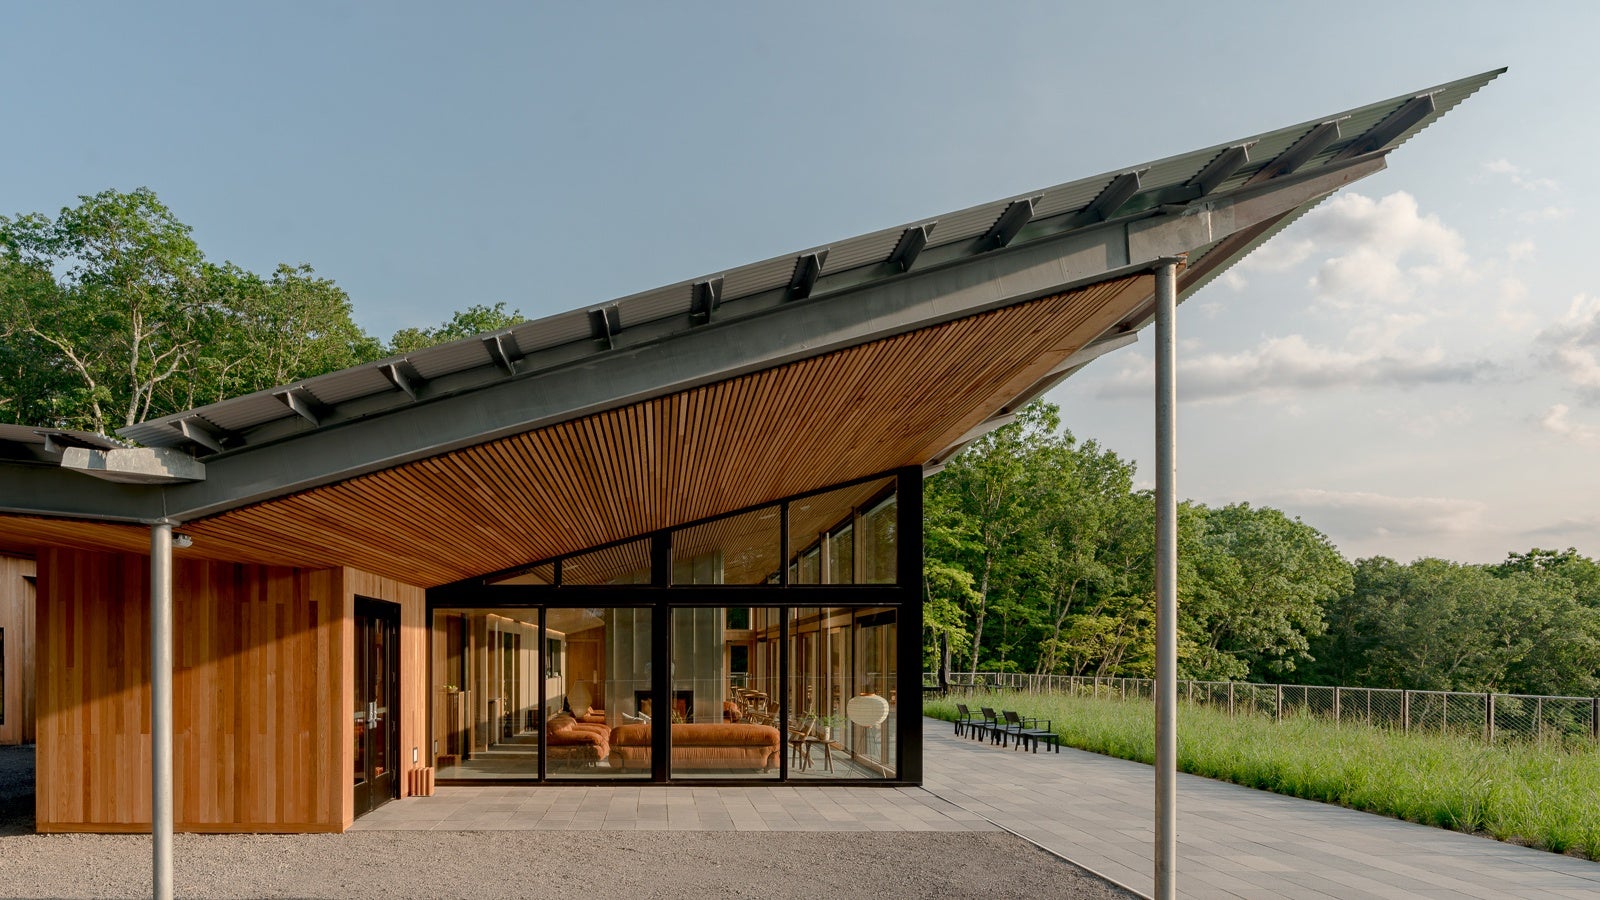 This Landscape Hotel In Upstate New York Is The Perfect Destination To Find A Moment Of Zen